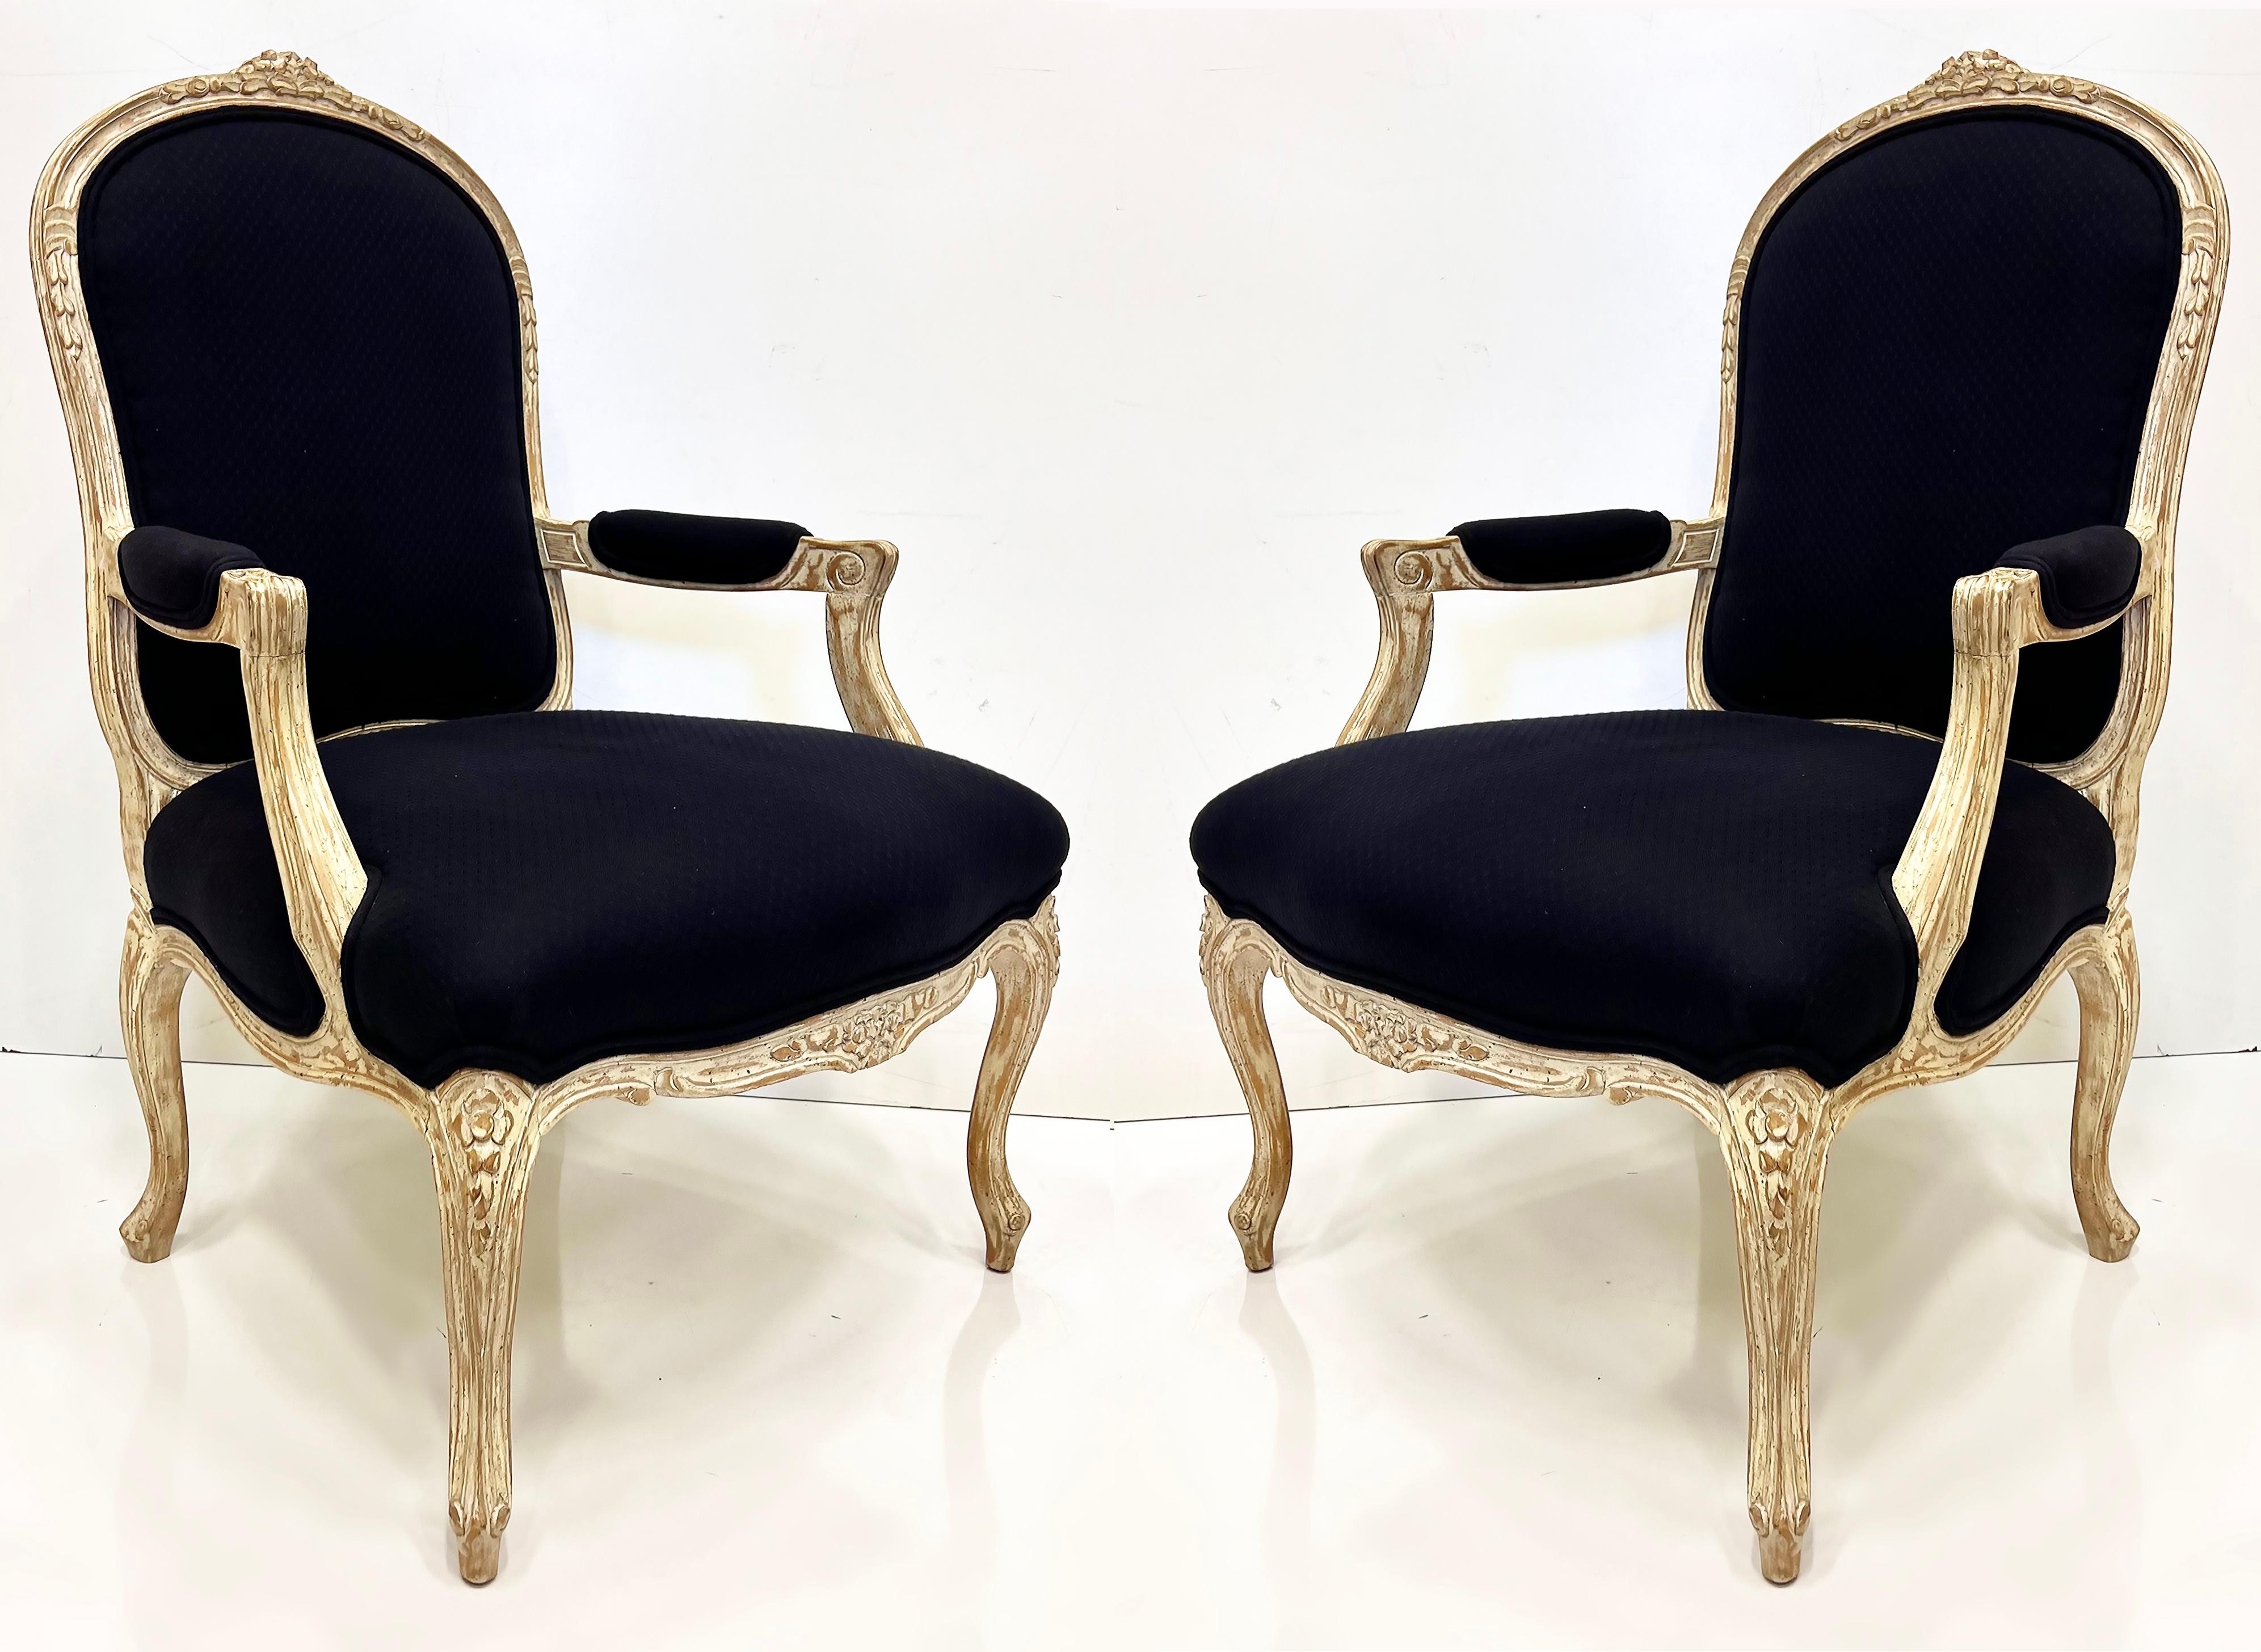 Substantial Vintage Louis XV Style Fauteuil Chairs, Large Scale Pair For Sale 8